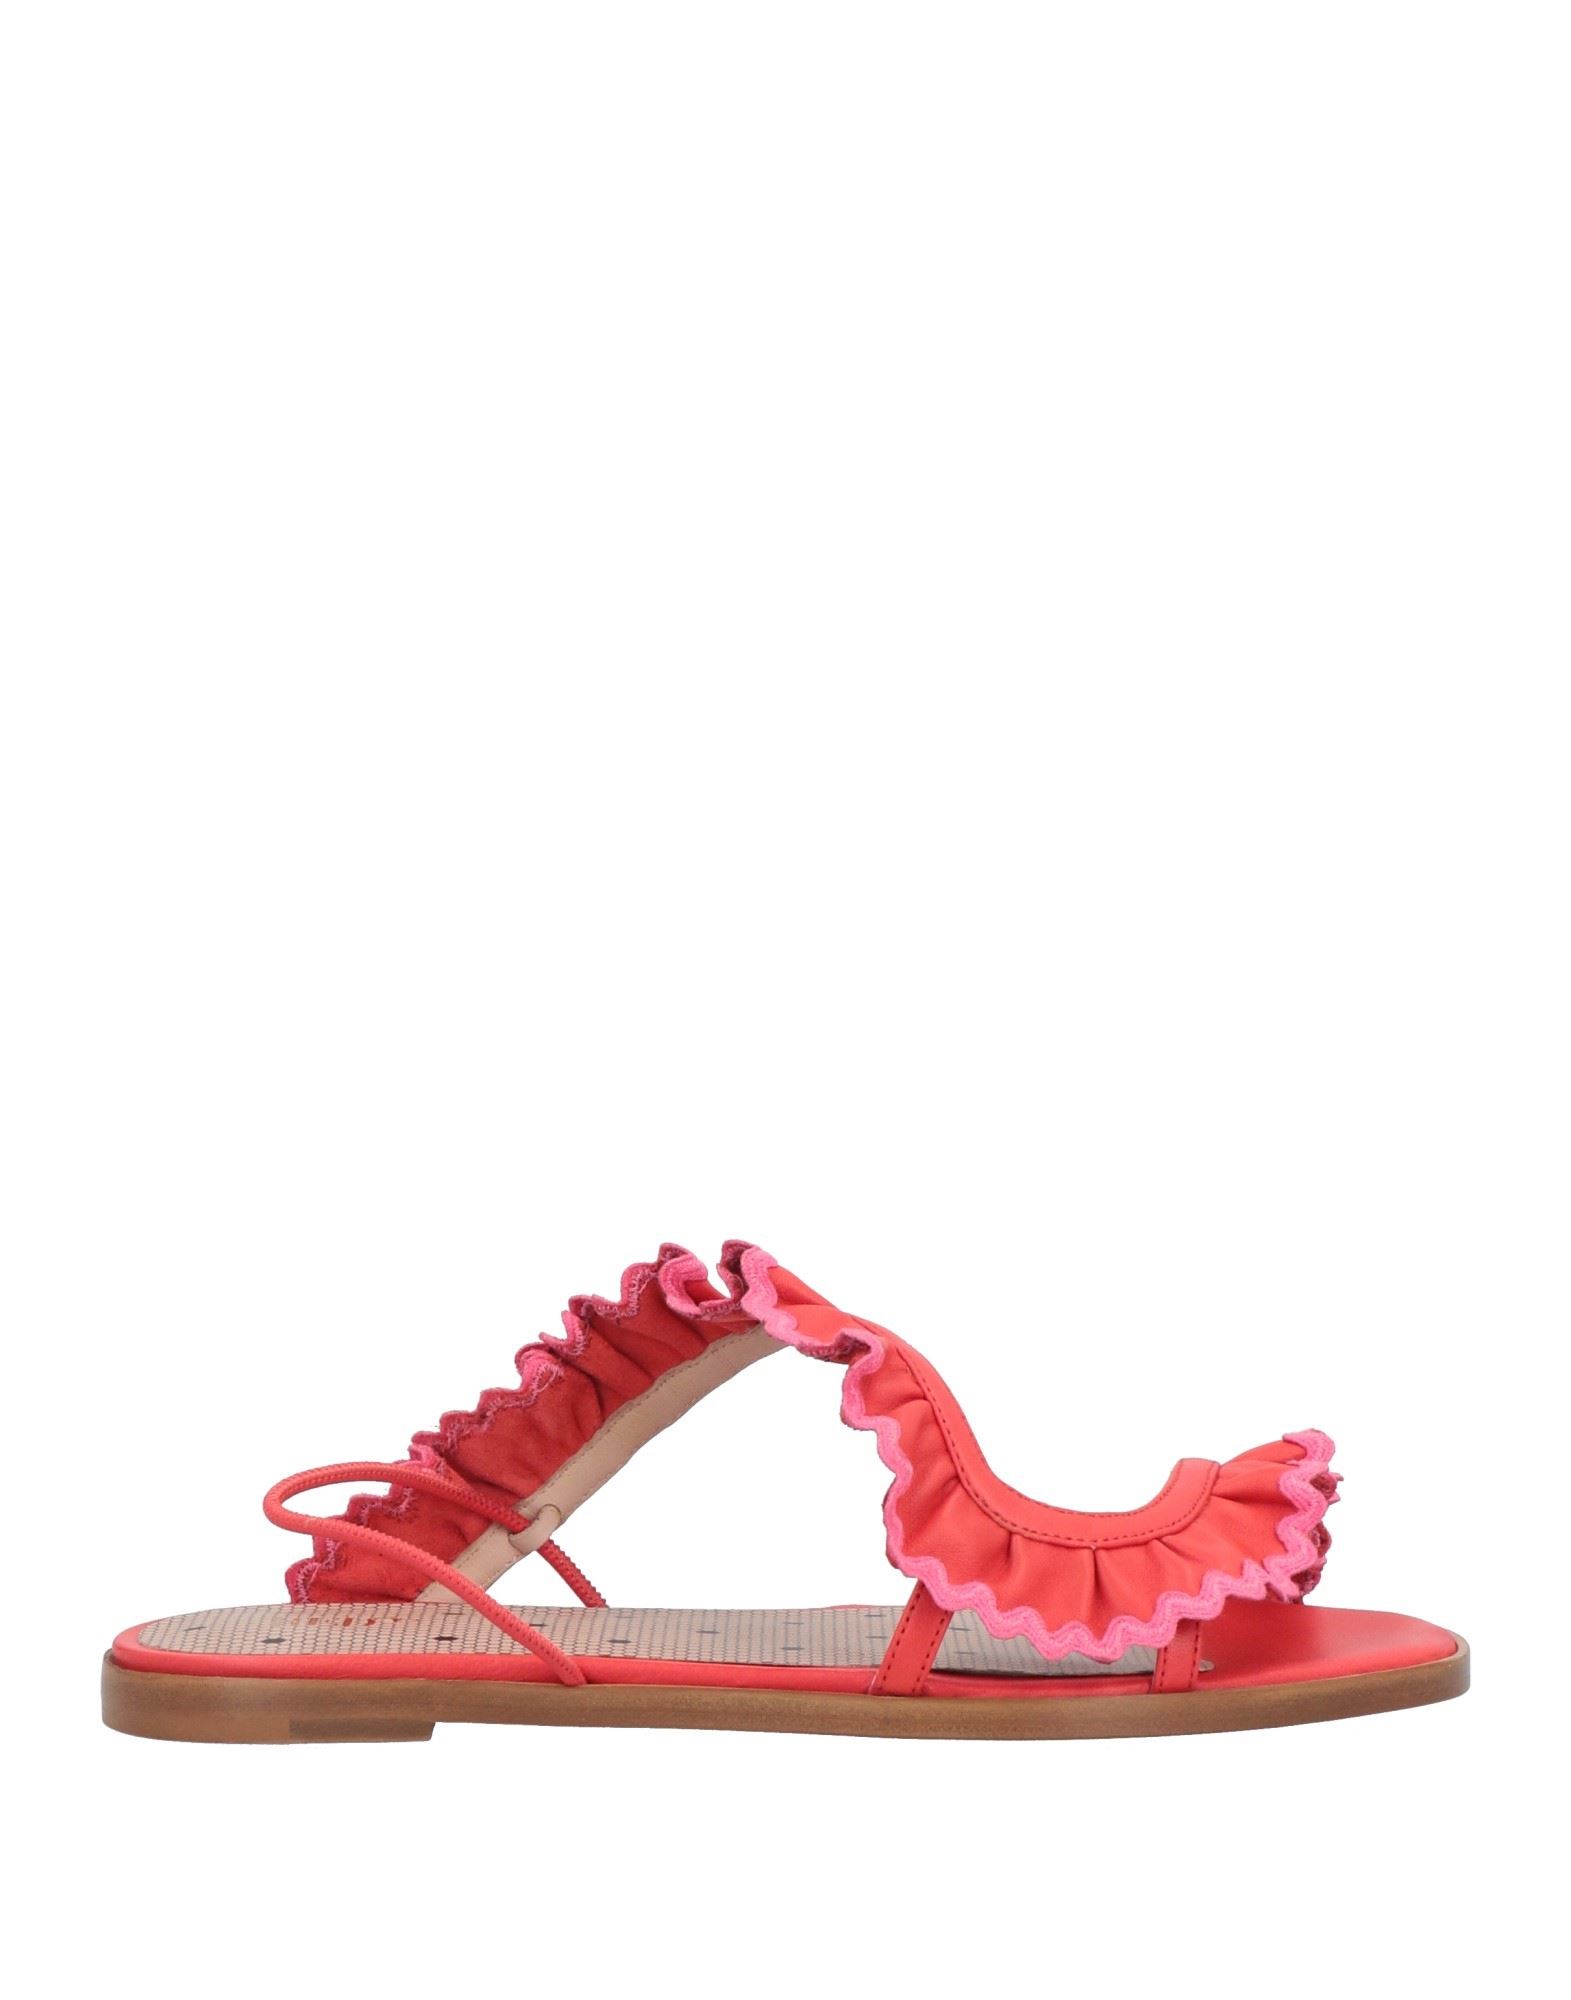 Redv Red(v) Woman Sandals Red Size 5 Soft Leather, Textile Fibers